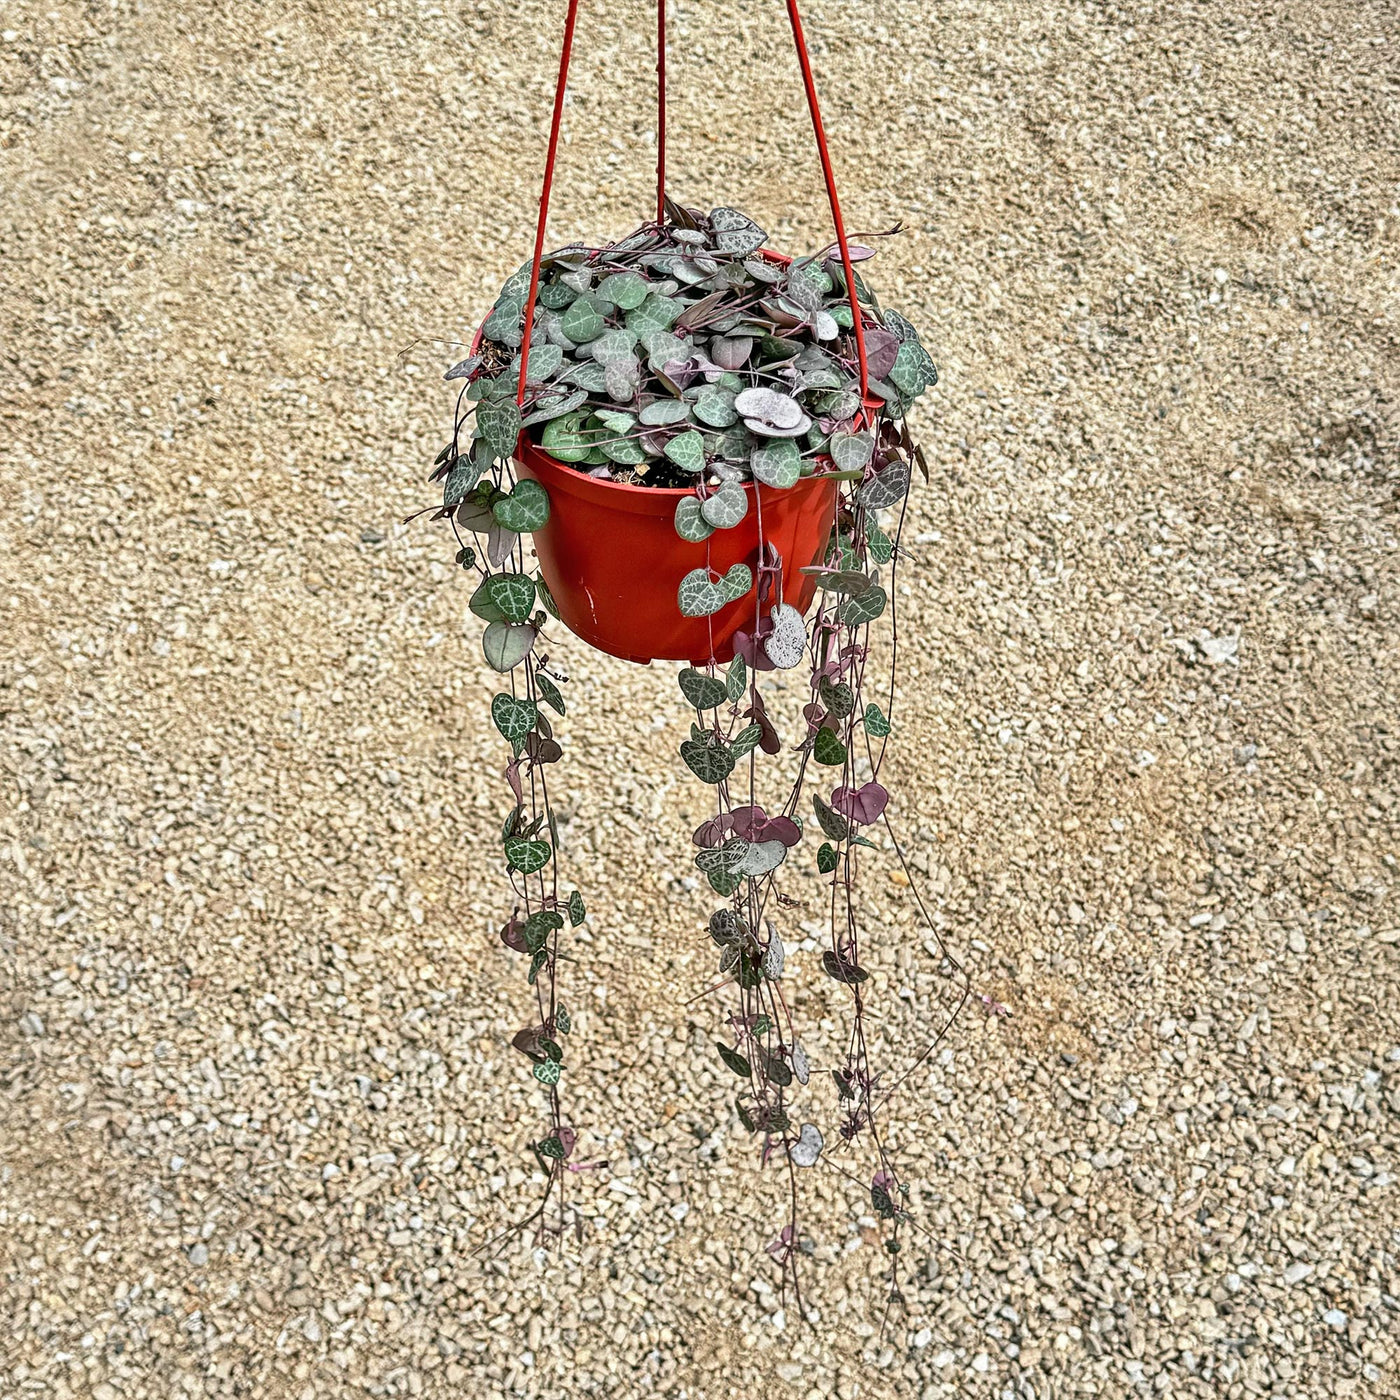 String of Hearts Plant – Ceropegia woodii